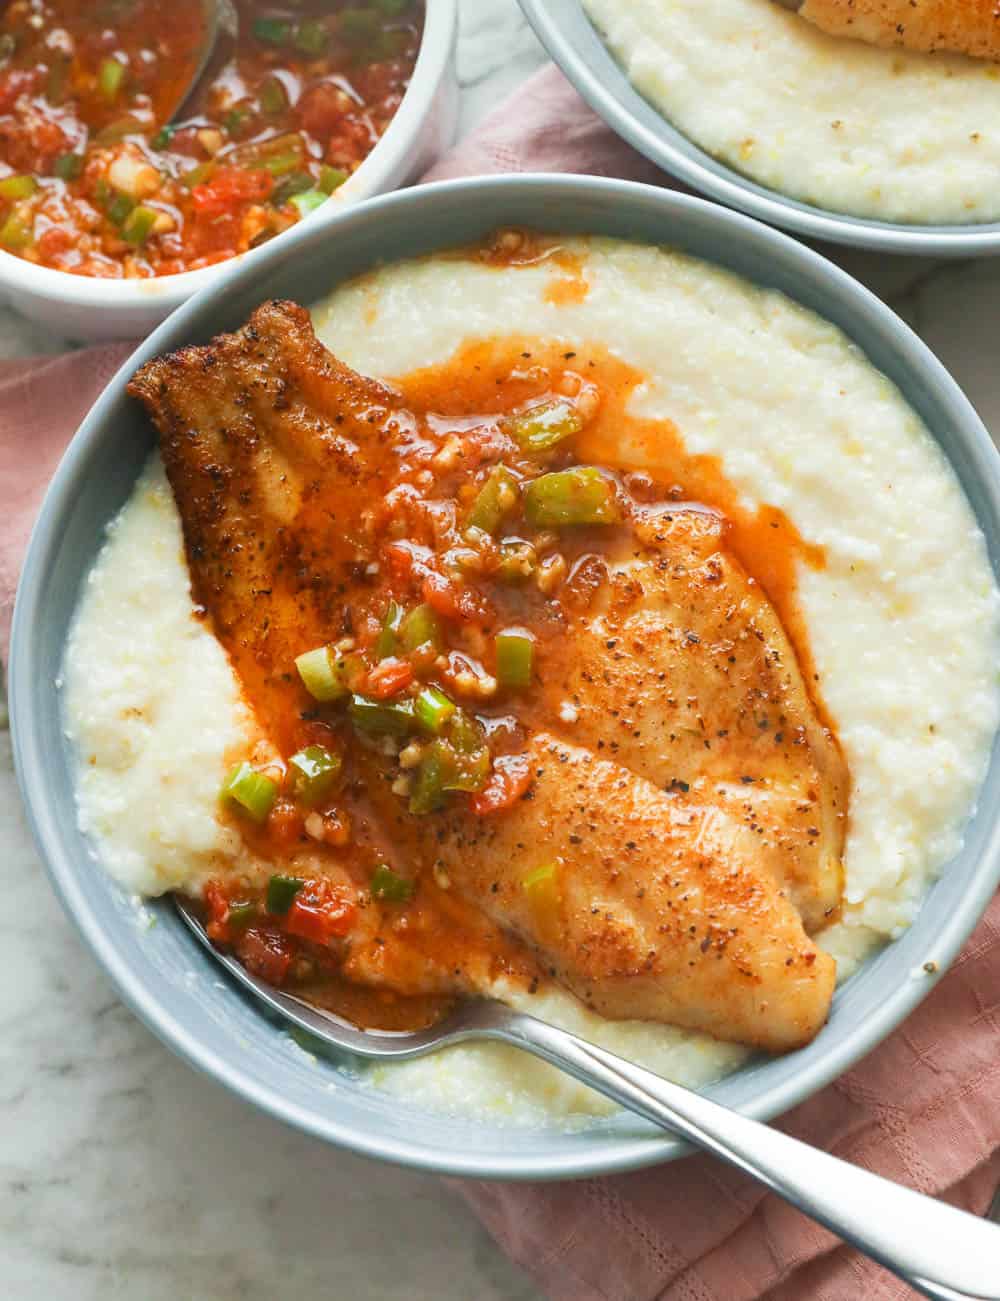 Fried fish with sauce in a bowl of grits